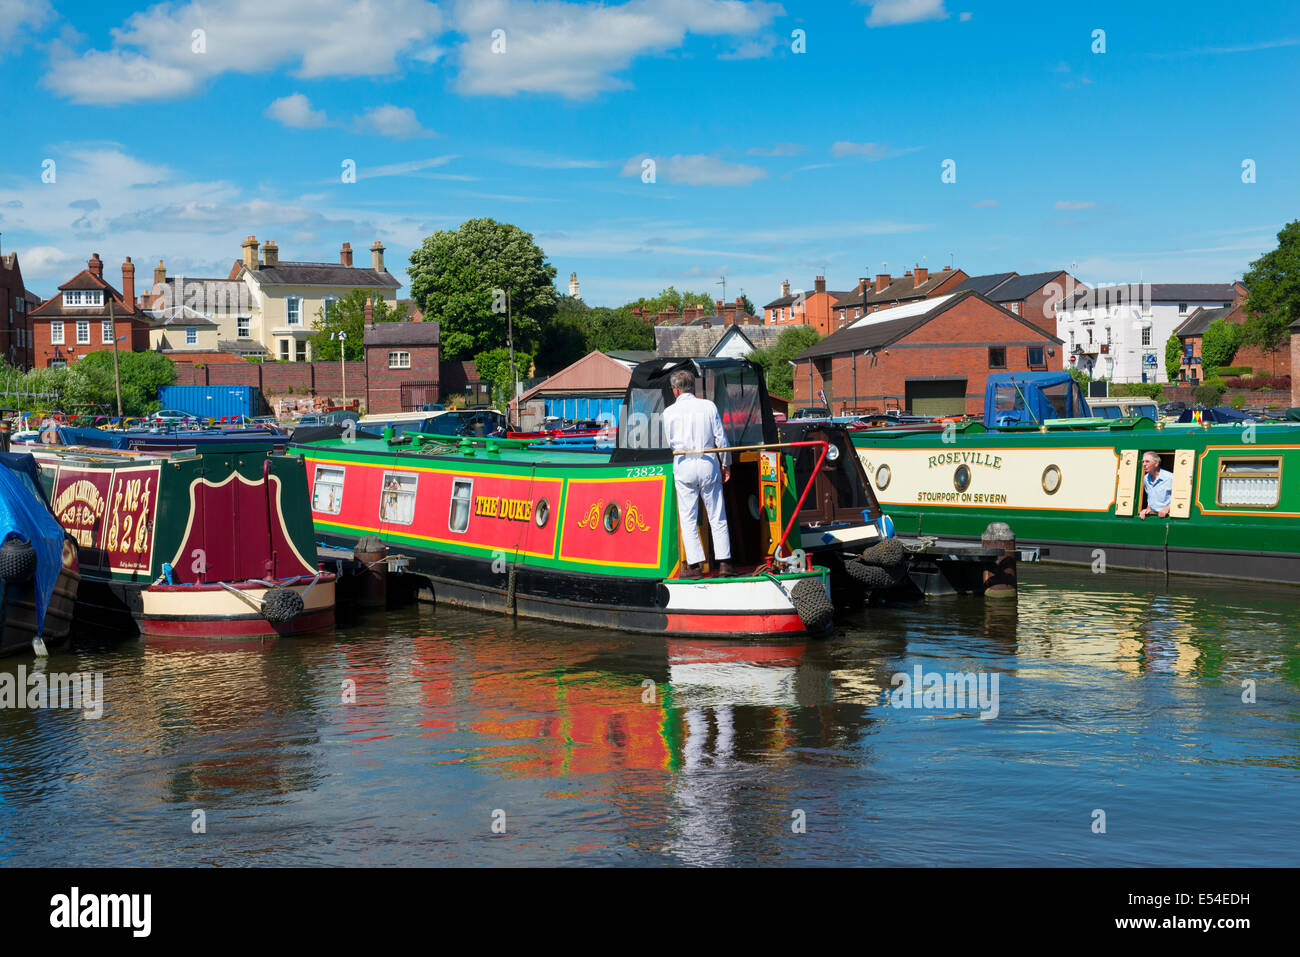 A canal boat being moored at the Stourport On Severn canal basin, Worcestershire, England, UK. Stock Photo